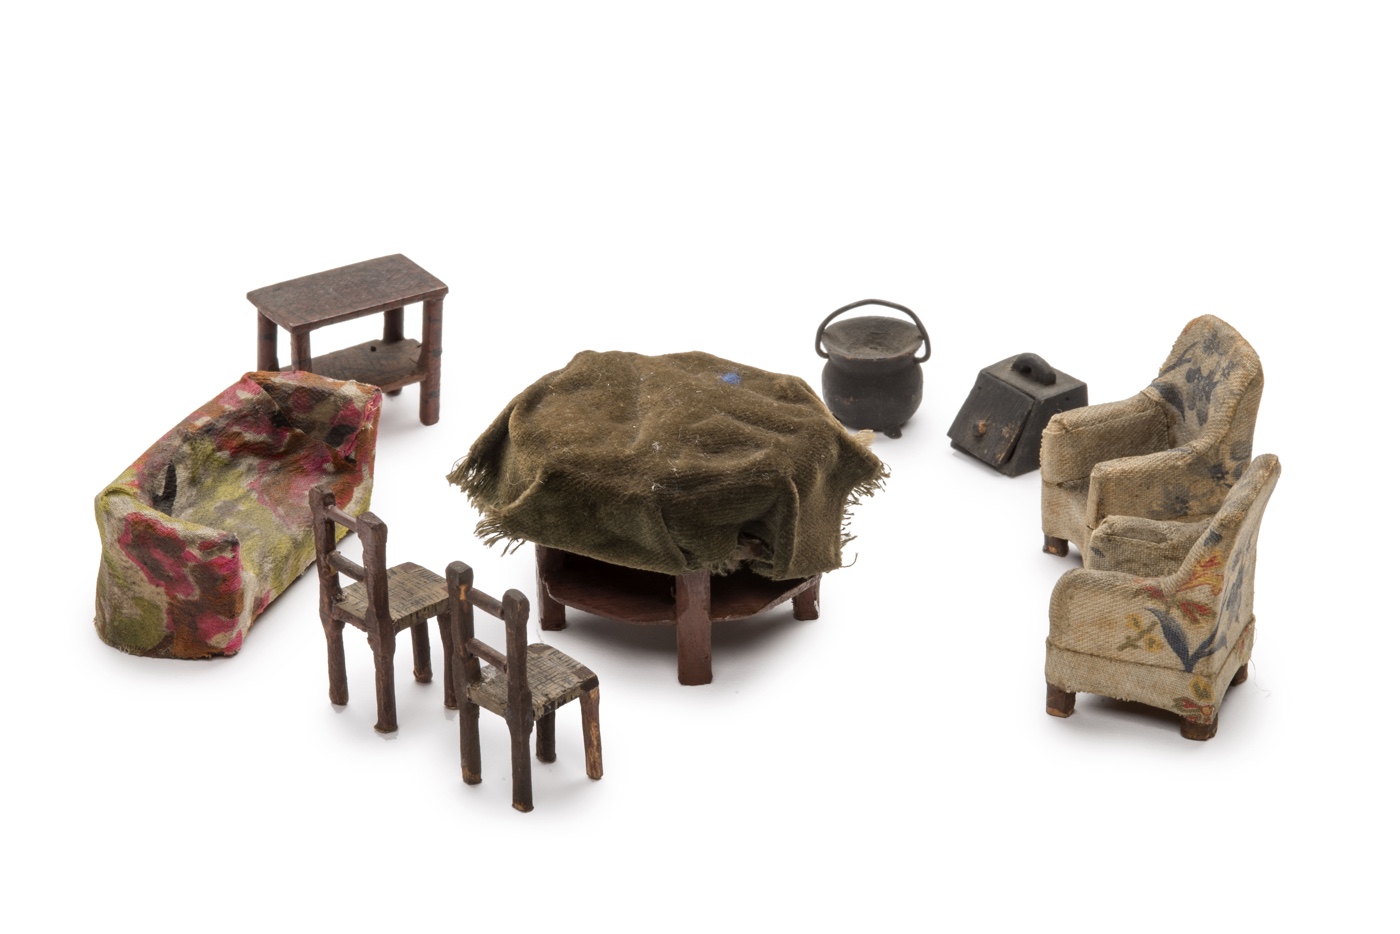 1a7. Patrick Mahon Miniature furniture used to reconstruct the murder scene of Emily Kaye, 1924 ∏ Museum of London